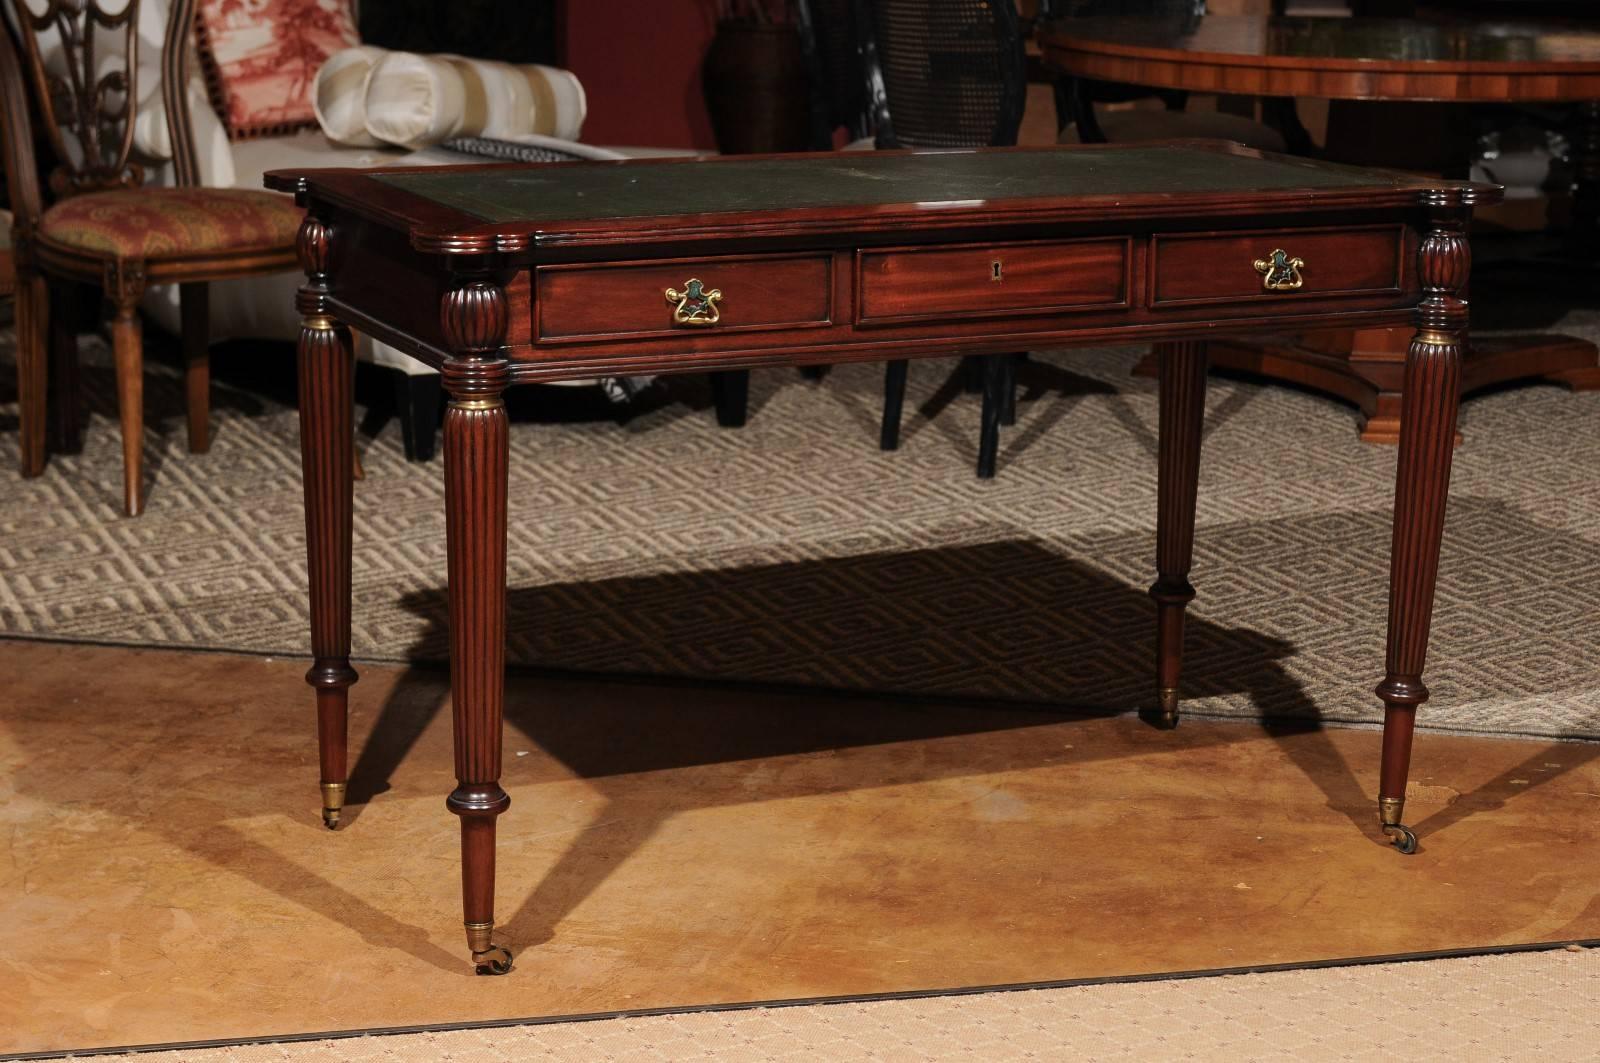 A lovely reproduction writing table with gilt tooled leather top and scalloped rounded corners. Three faux drawers on the back and three functional drawers on the front (all with brass pulls) lets it float in a room. Legs are reeded and fluted